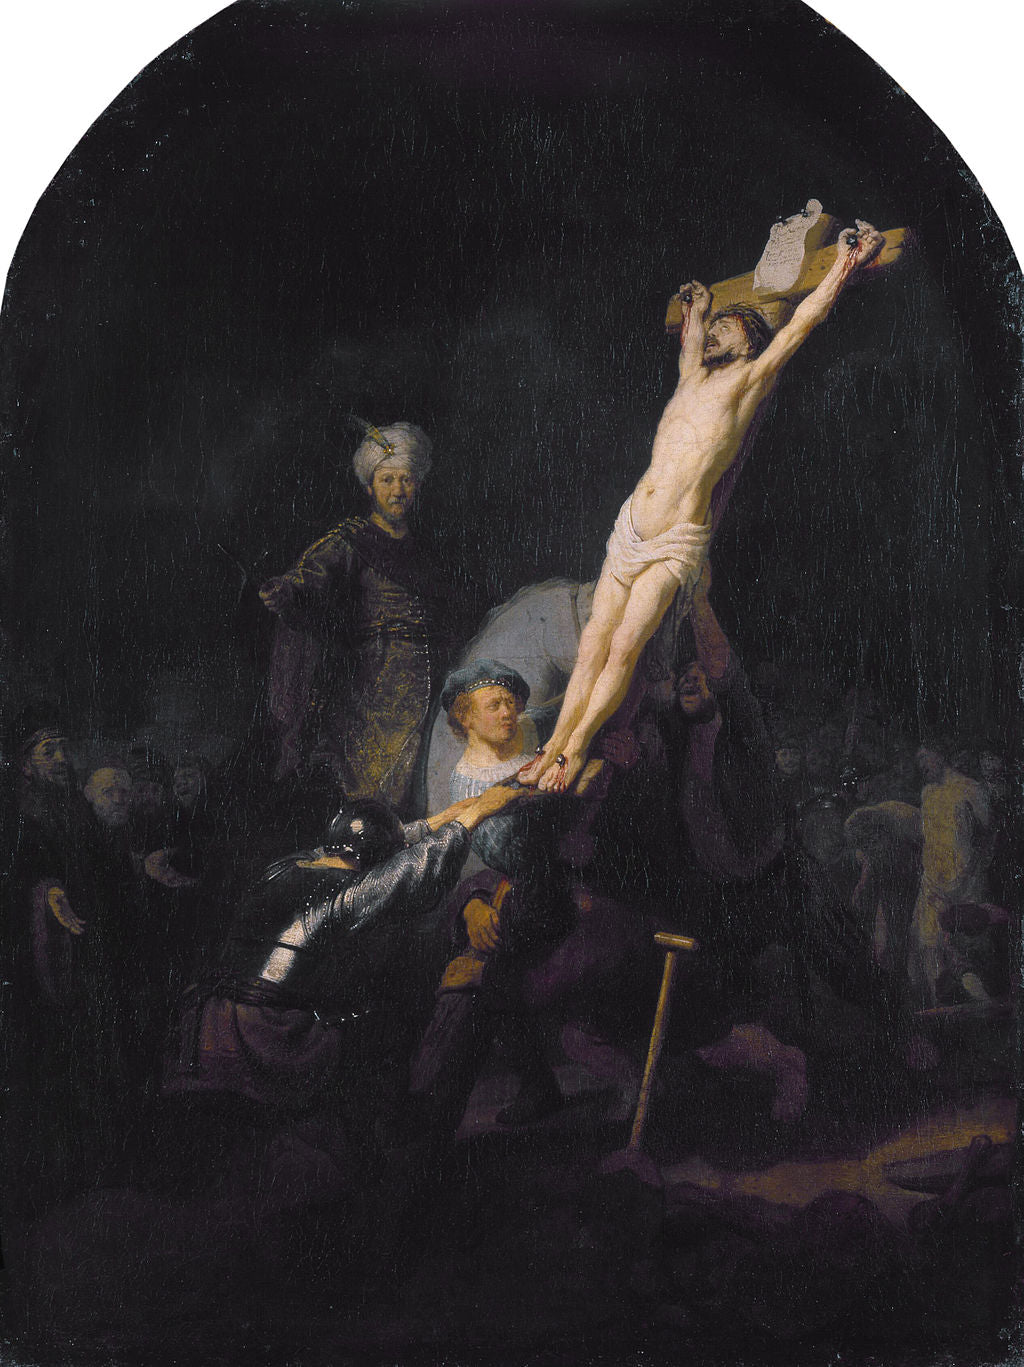 The Raising of the Cross Painting by Rembrandt Oil on Canvas Reproduction by Blue Surf Art